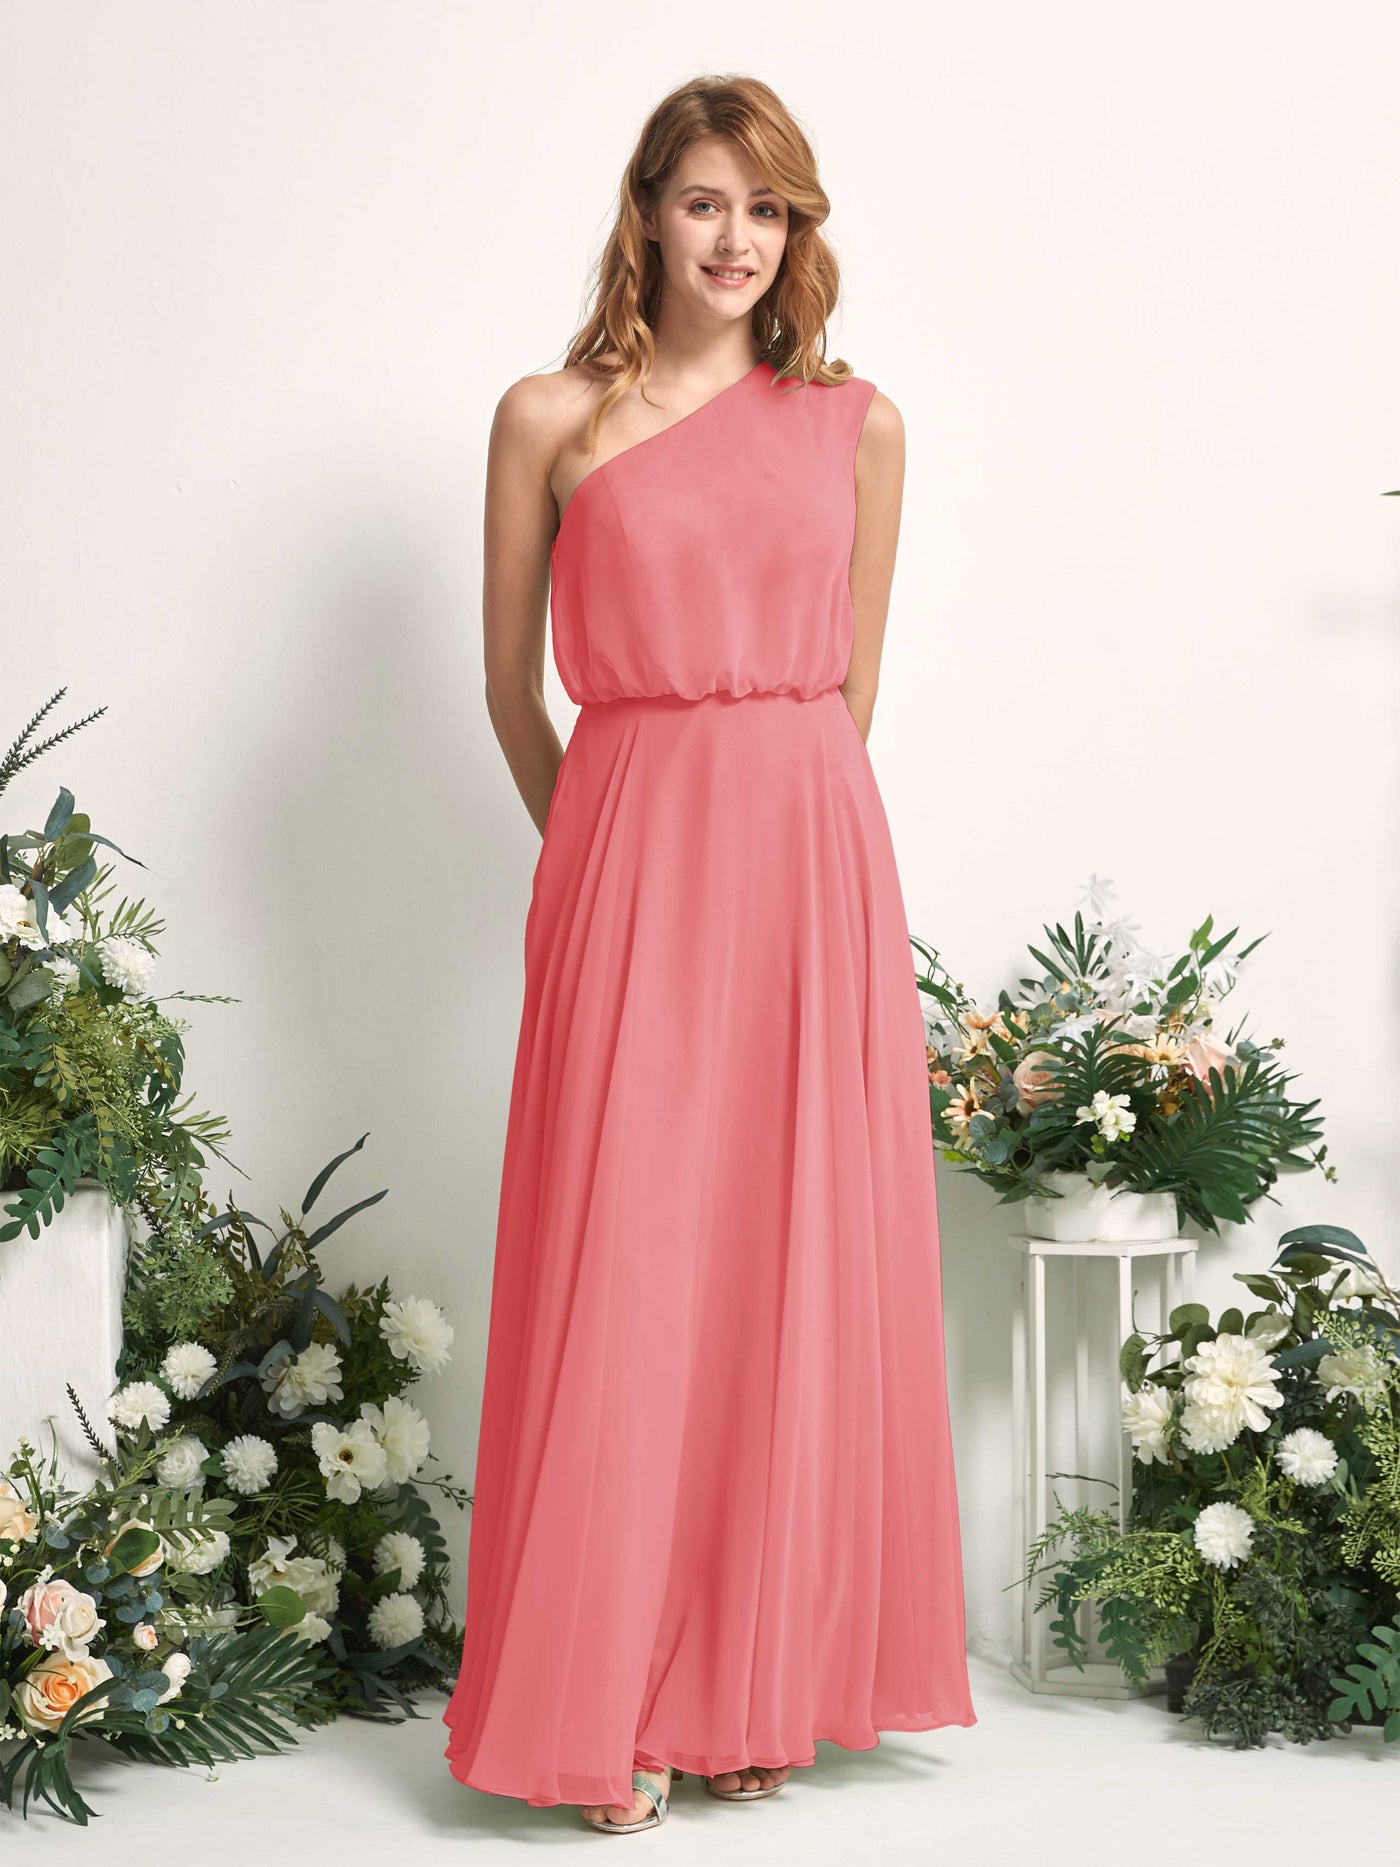 Bridesmaid Dress A-line Chiffon One Shoulder Full Length Sleeveless Wedding Party Dress - Coral Pink (81226830)#color_coral-pink